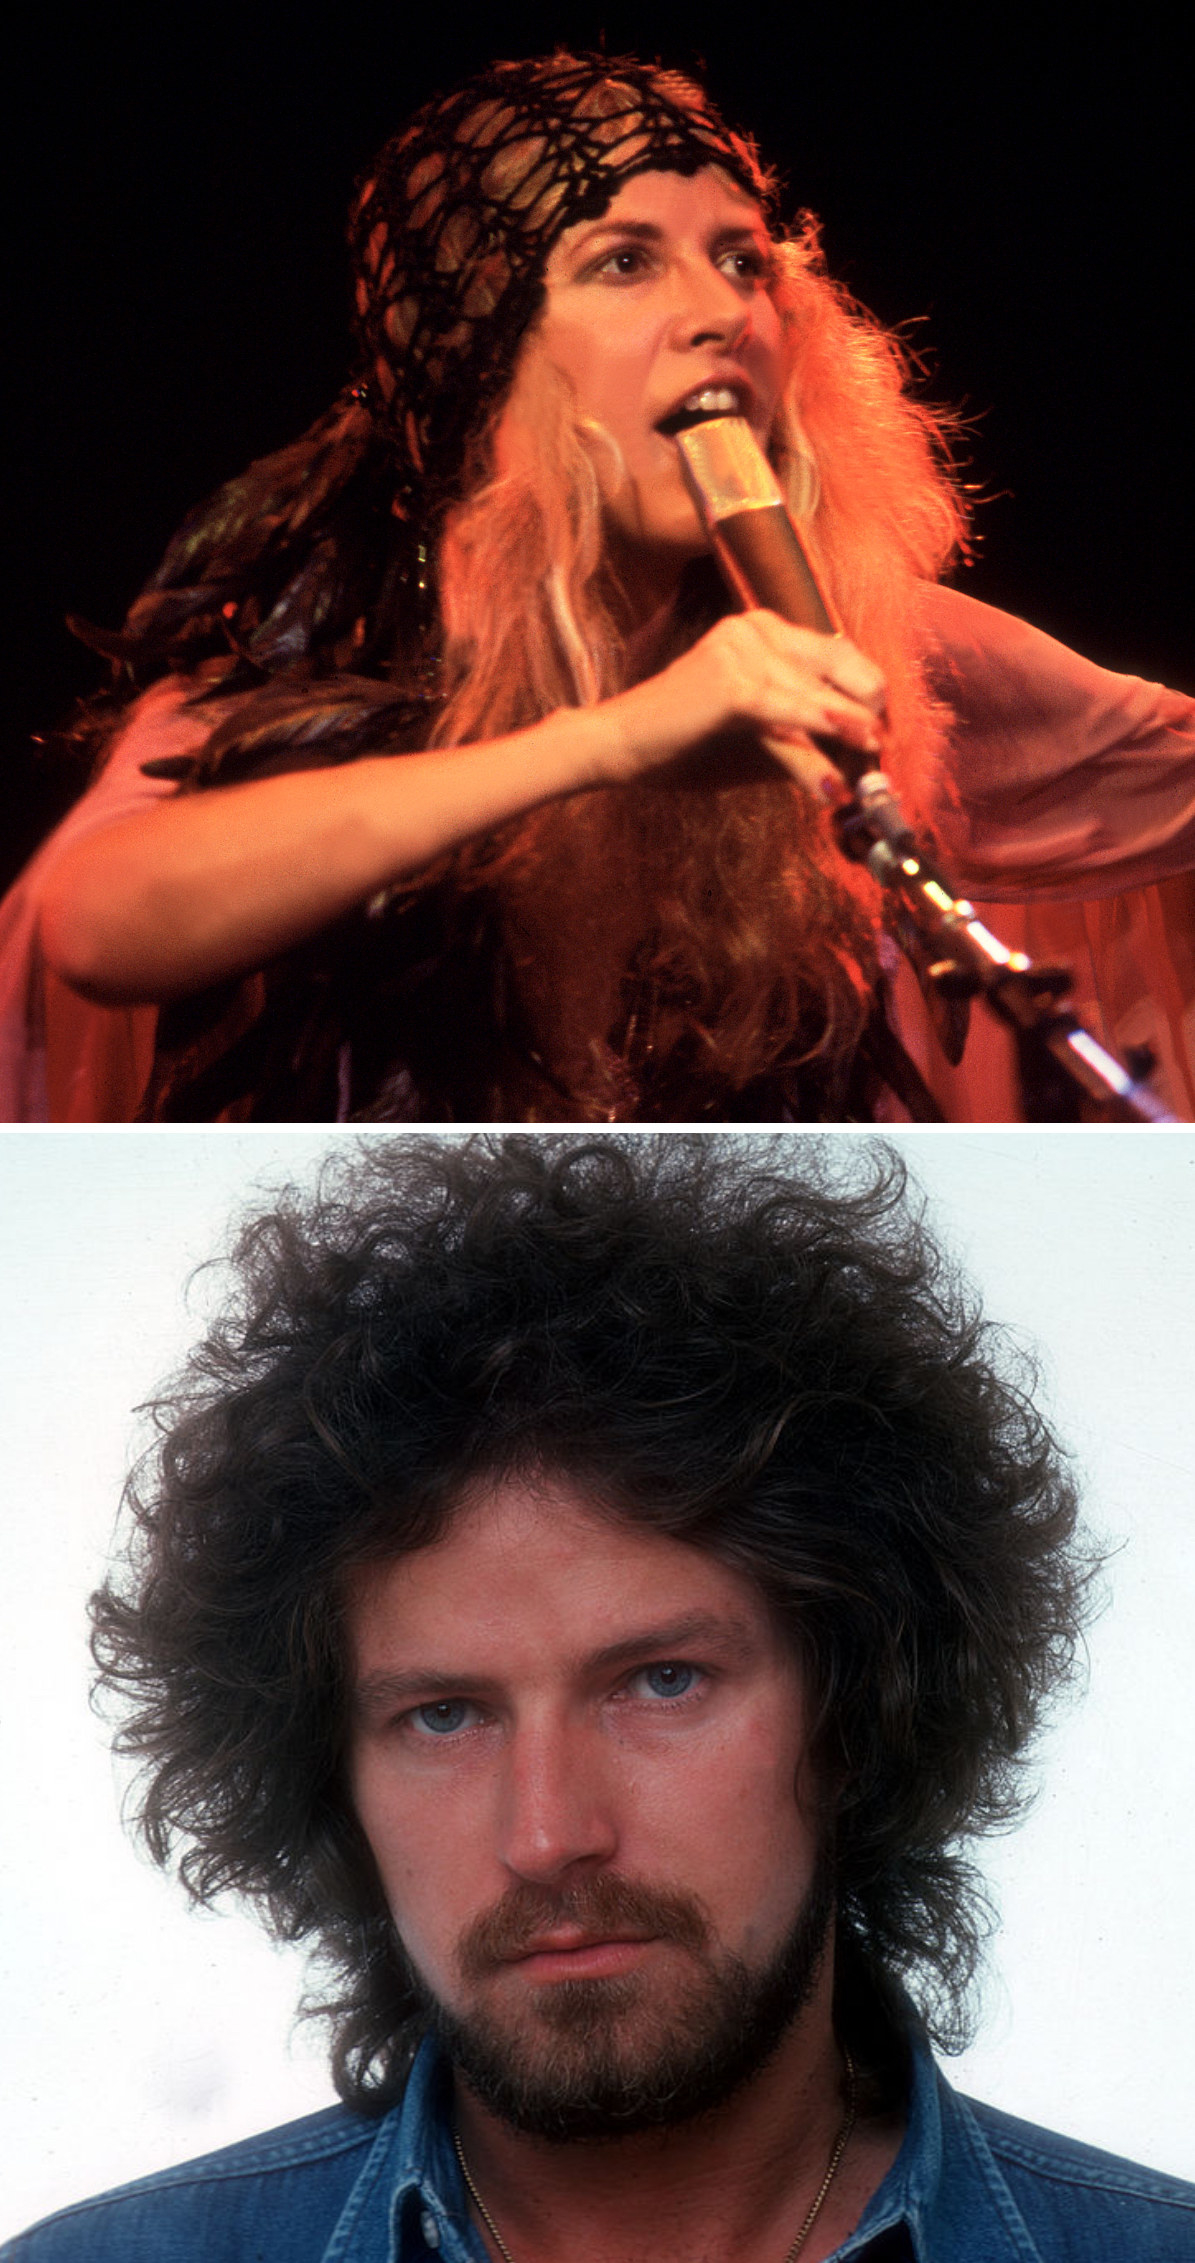 Nicks performing live in concert with Fleetwood Mac in 1978; Henley posing for a portrait in 1975